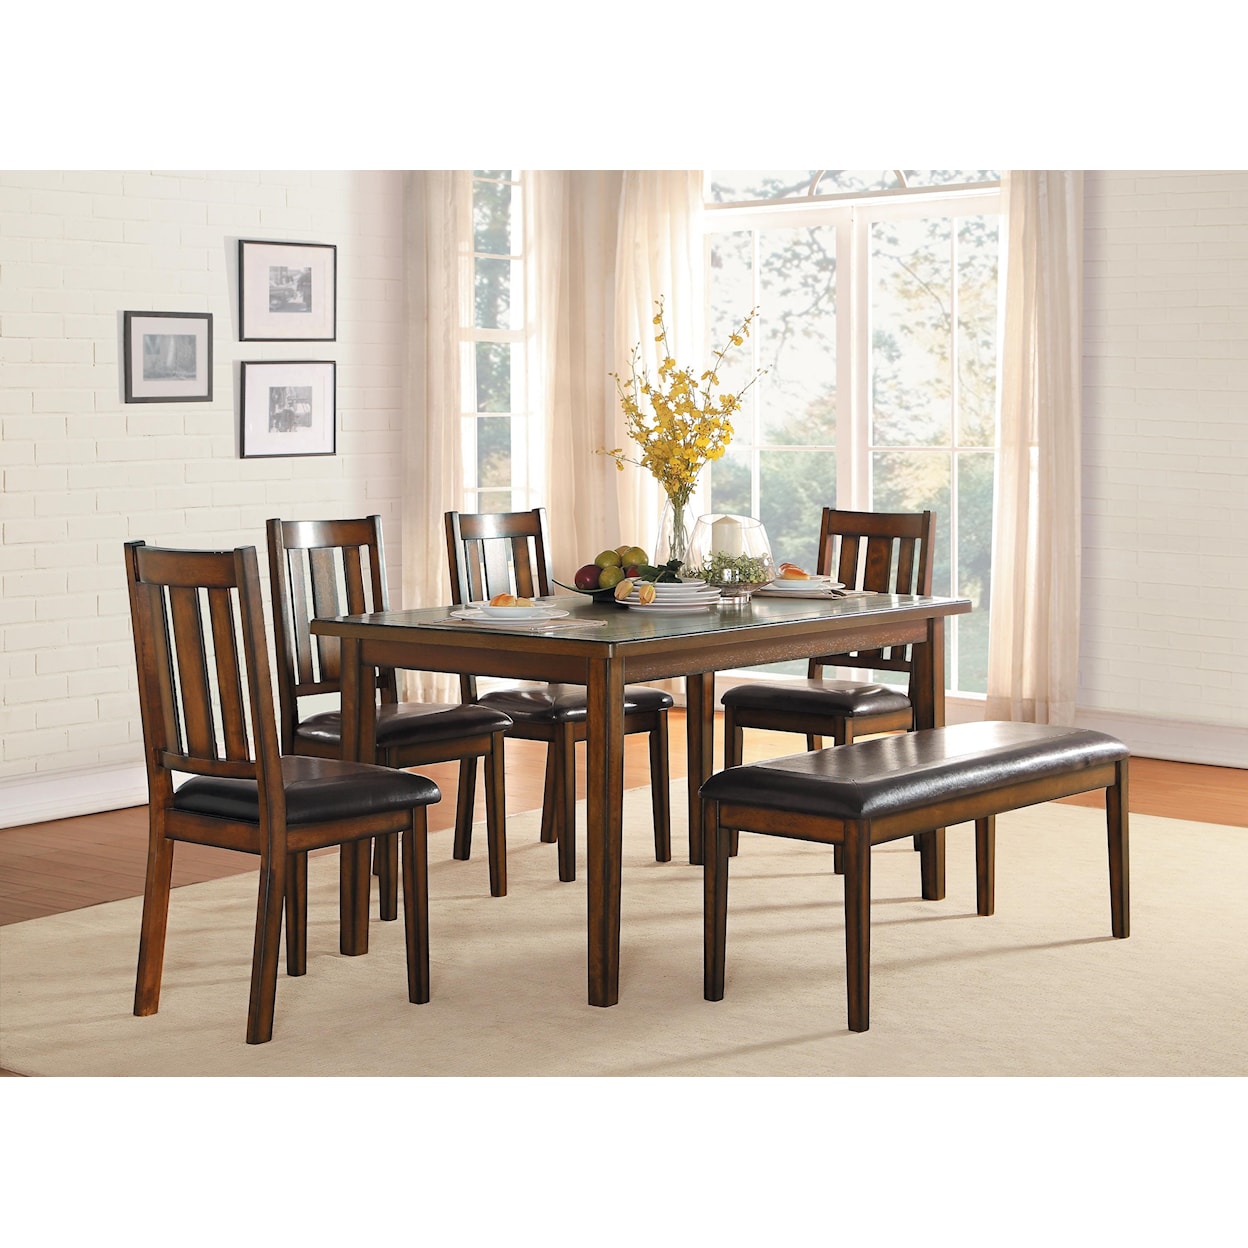 Homelegance Delmar Dining Table, Bench and 4 Chairs